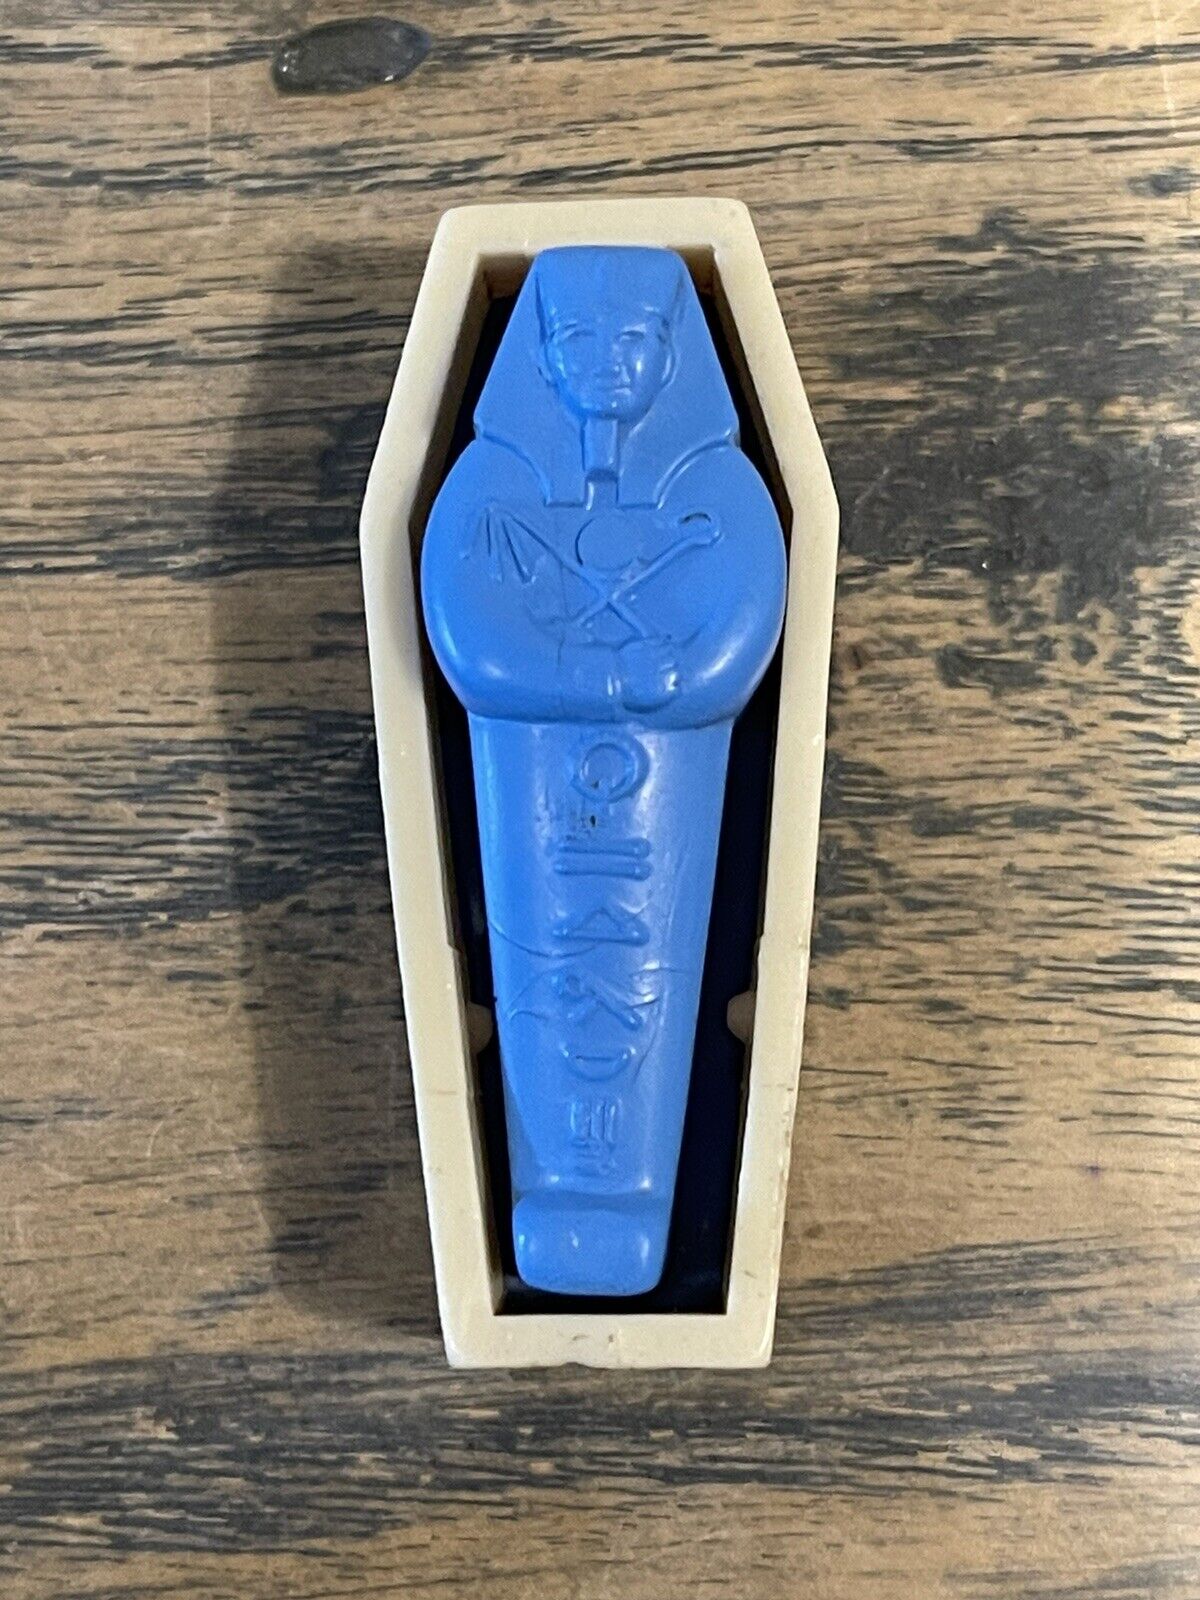 Vintage 1973 King Tut Mysterious Mummy Magic Toy Franco-American Novelty Co NYC